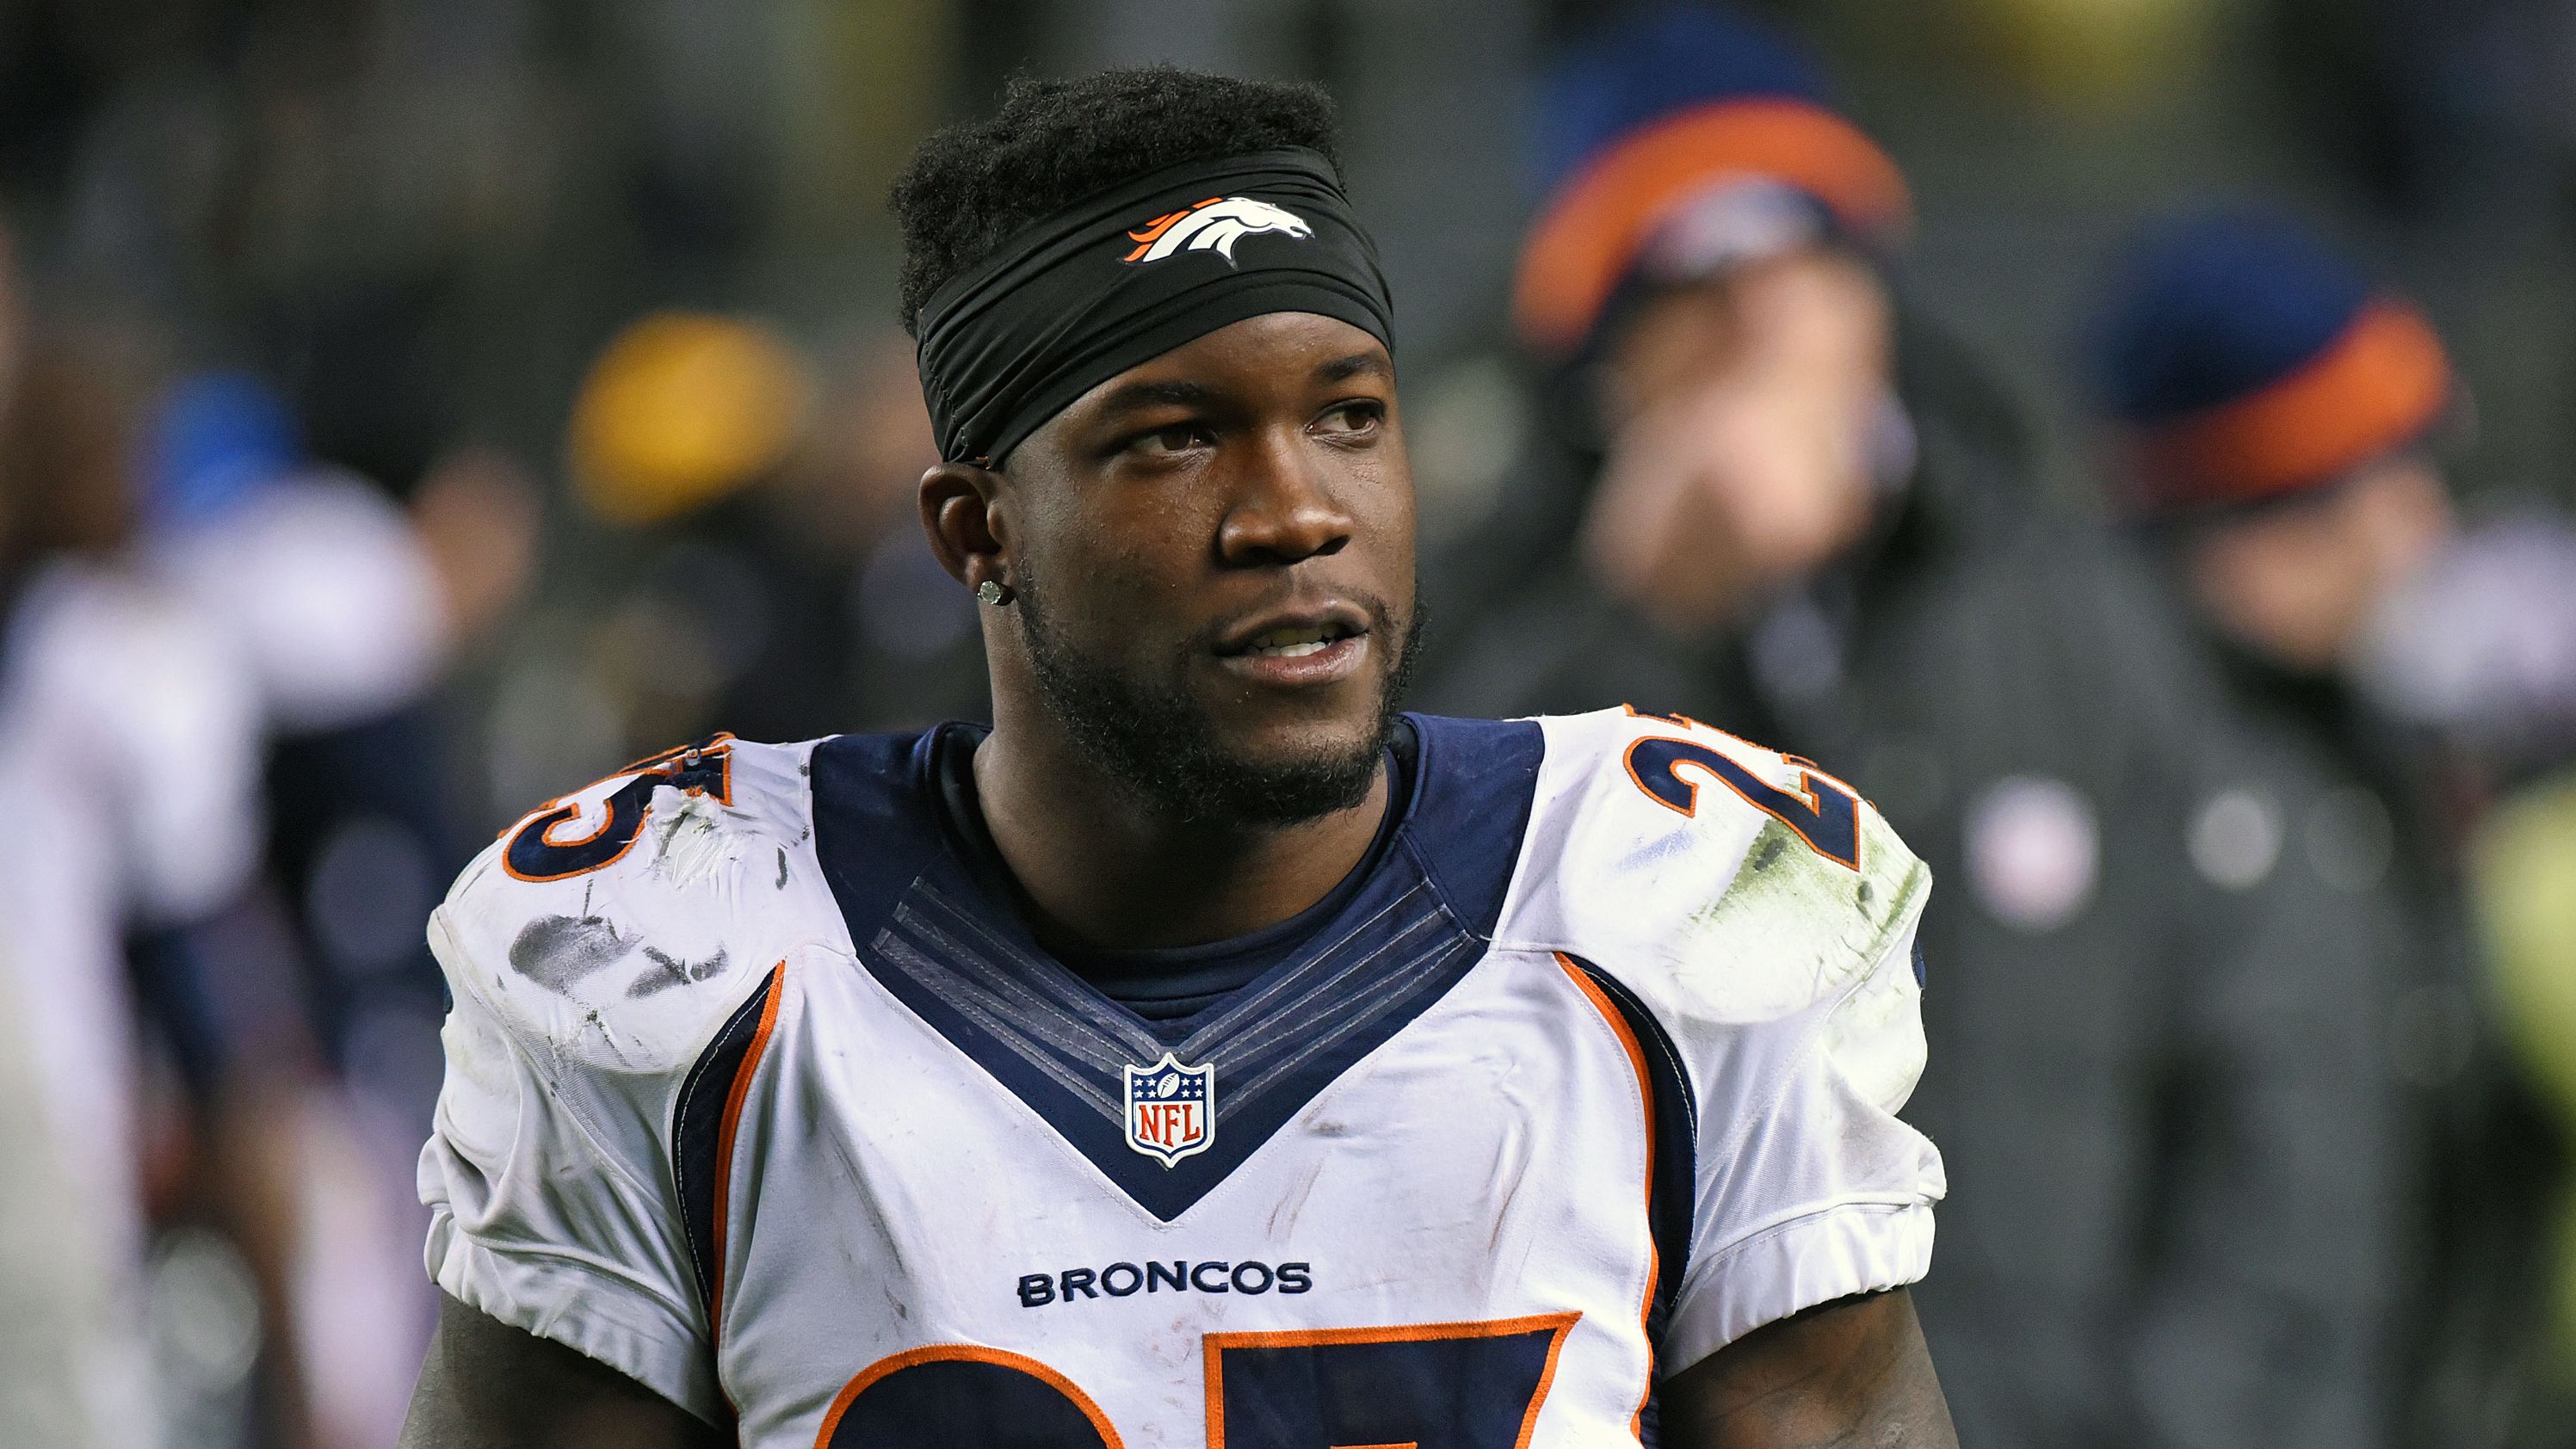 <a href="https://www.cnn.com/2022/12/22/sport/ronnie-hillman-death-spt-intl/index.html" target="_blank">Ronnie Hillman,</a> a Super Bowl-winning running back for the Denver Broncos, died on December 21, according to a post from his family on his Instagram page. In August, Hillman was diagnosed with renal medullary carcinoma, a rare form of cancer. He was 31.